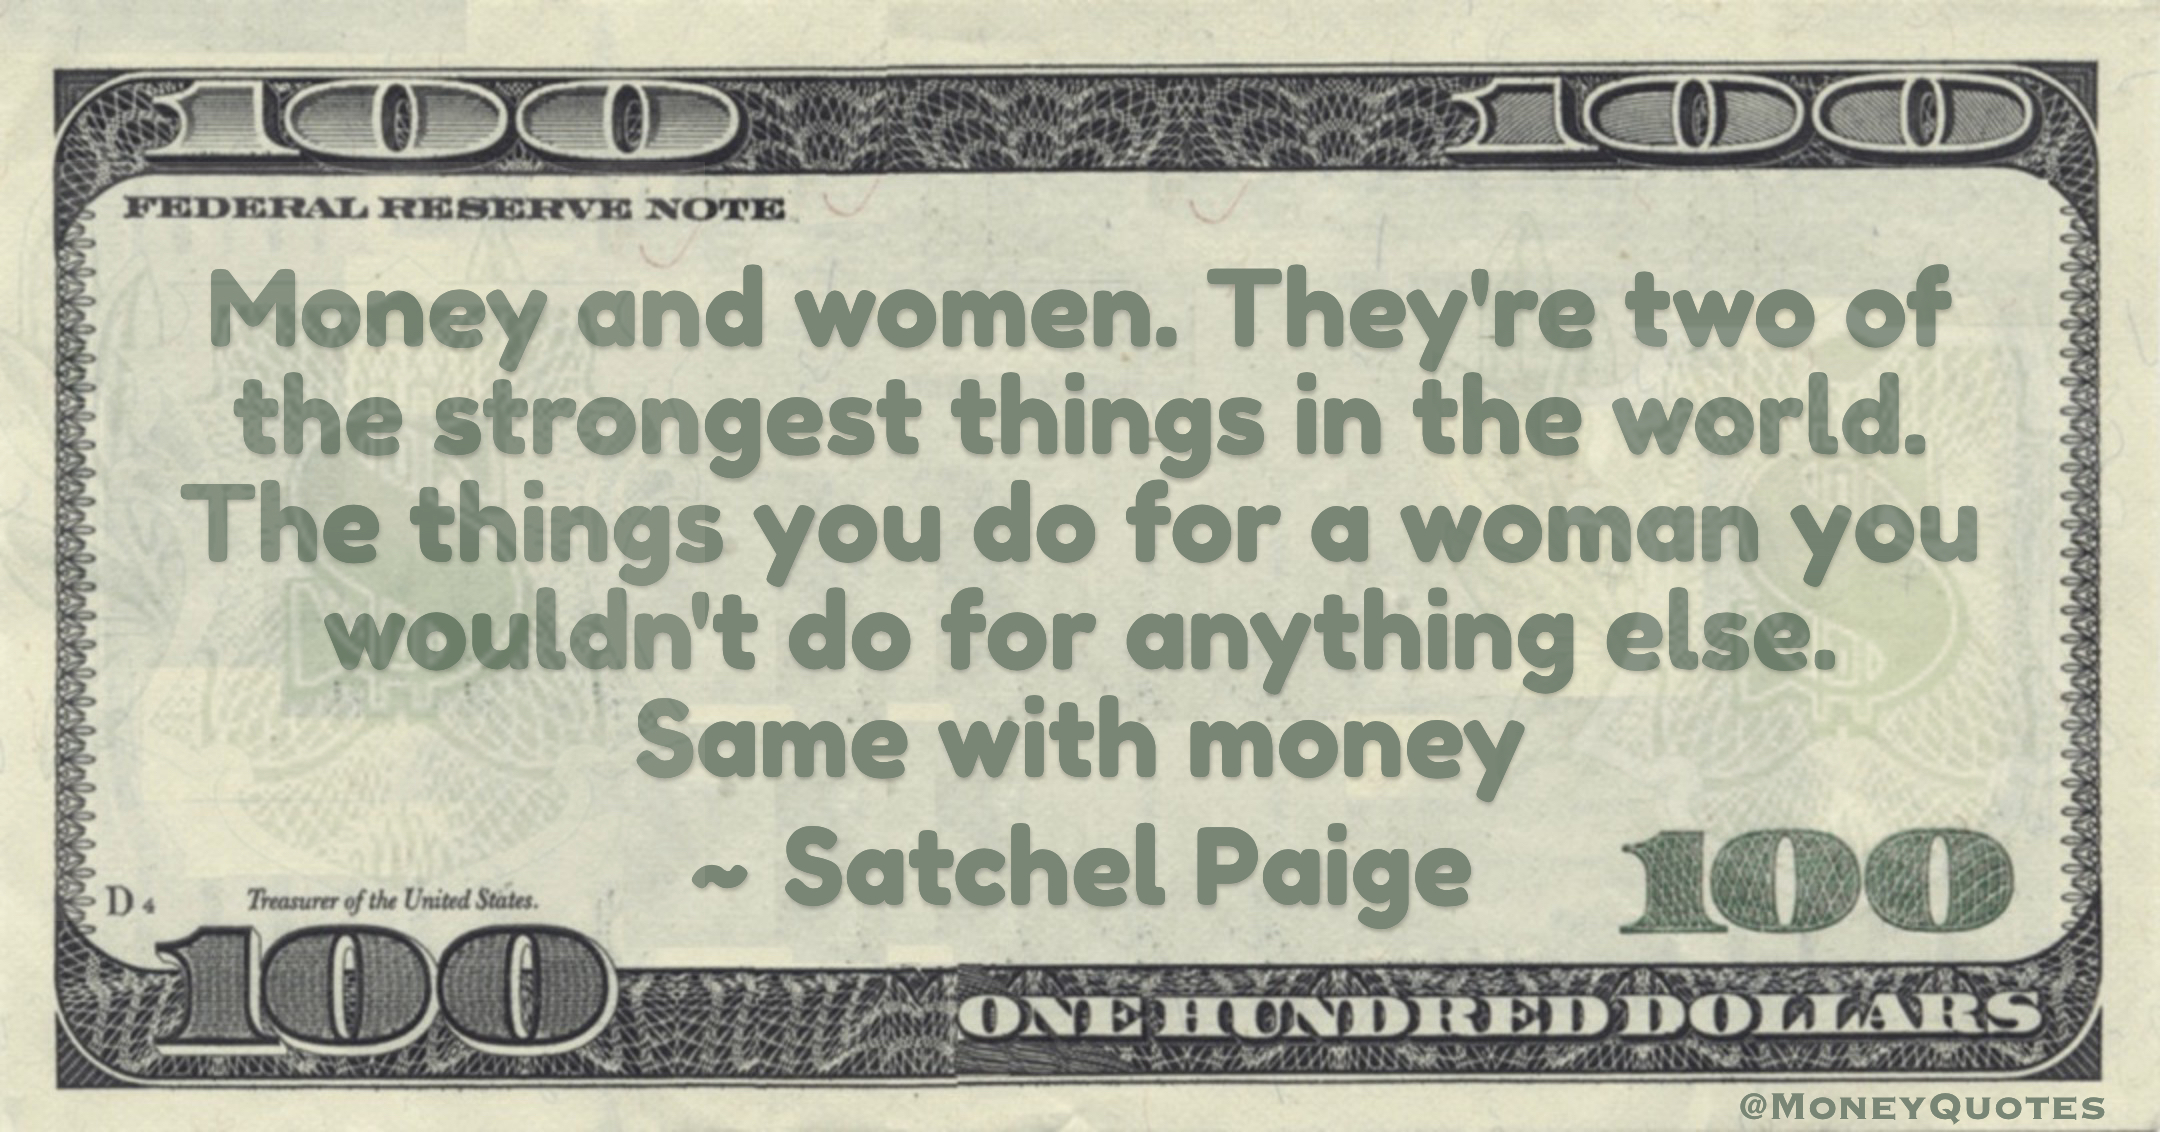 Money and women. The things you do for a woman you wouldn't do for anything else. Same with money Quote